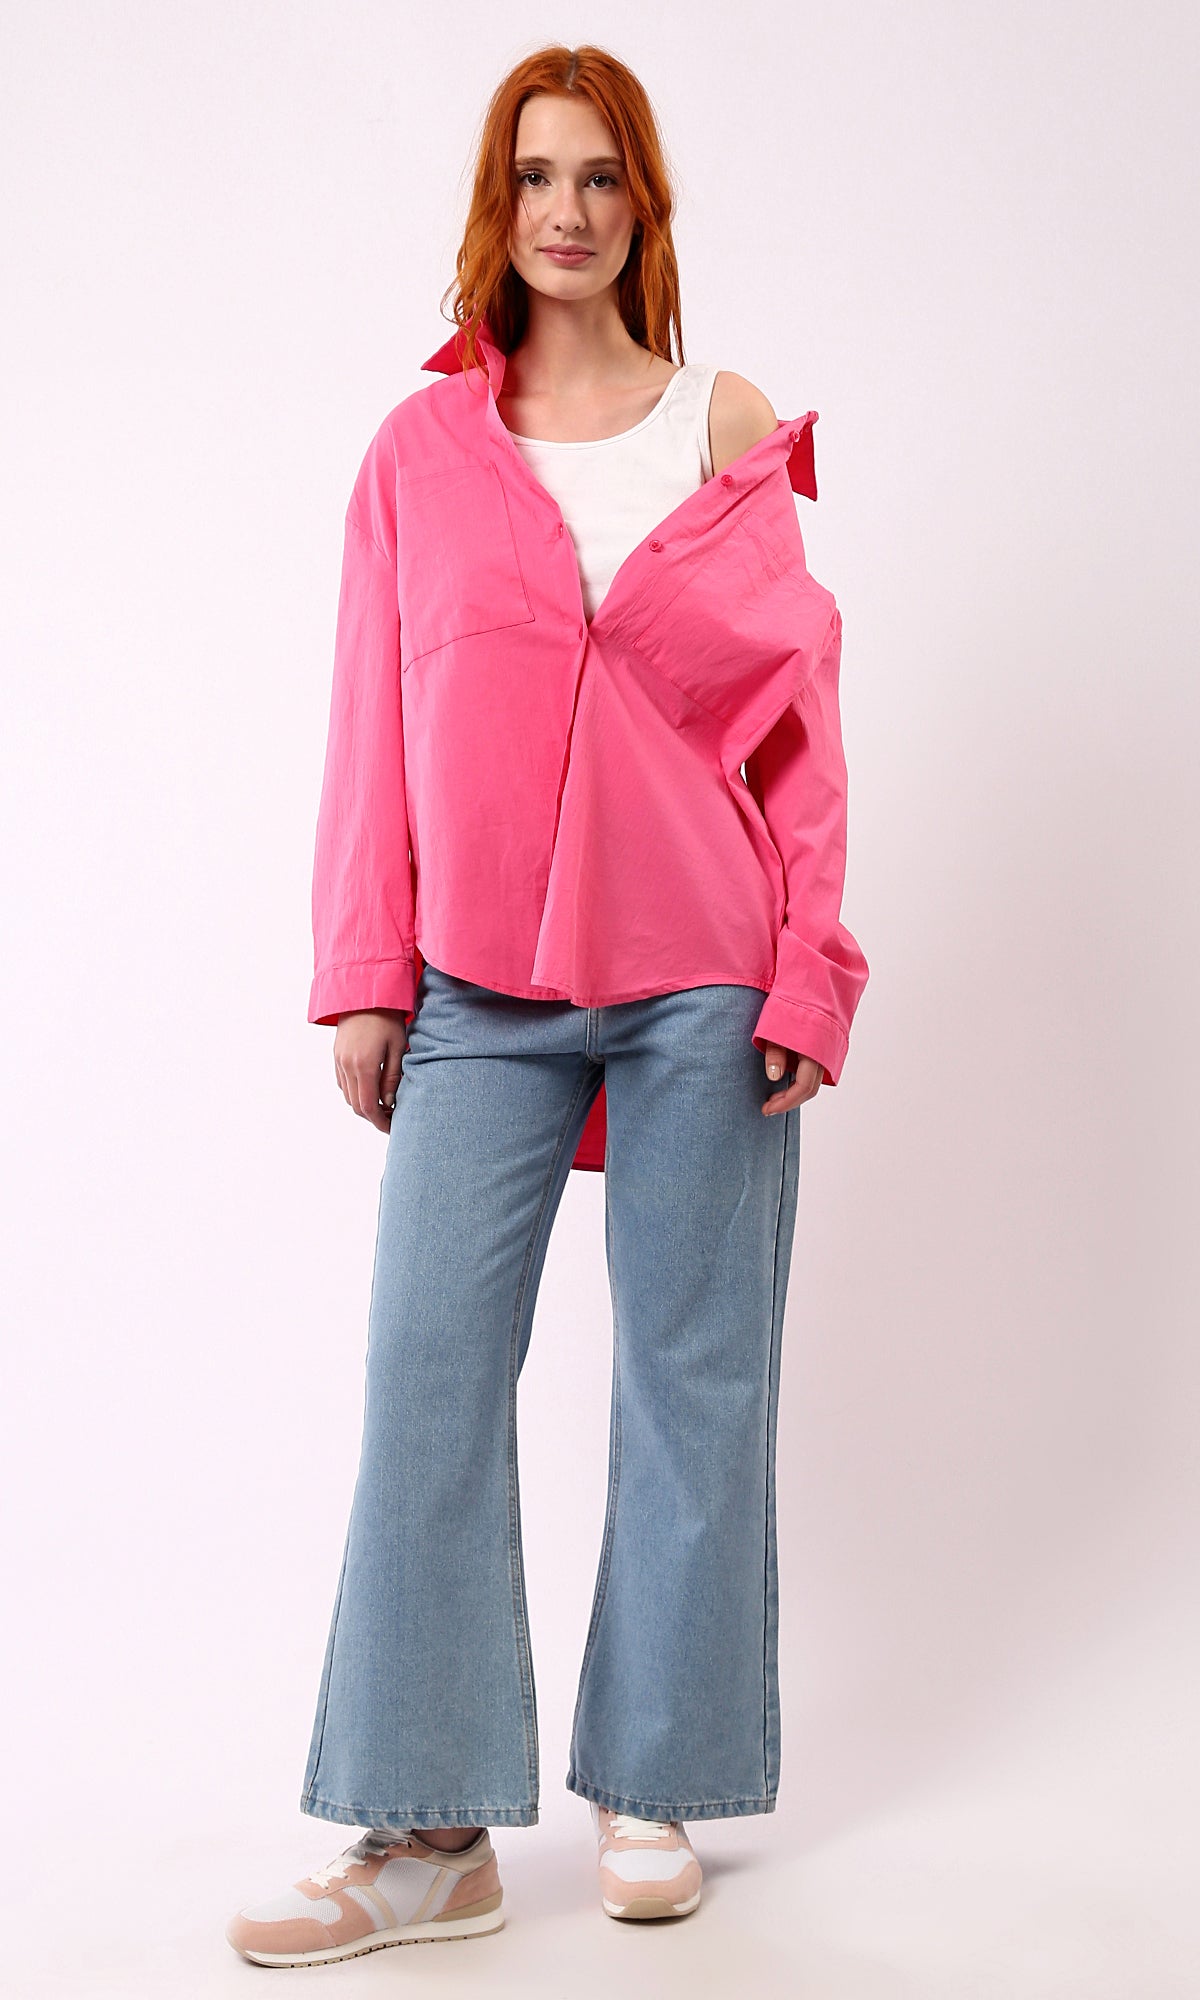 O177906 Relaxed Fit Long Sleeves Fuchsia Shirt